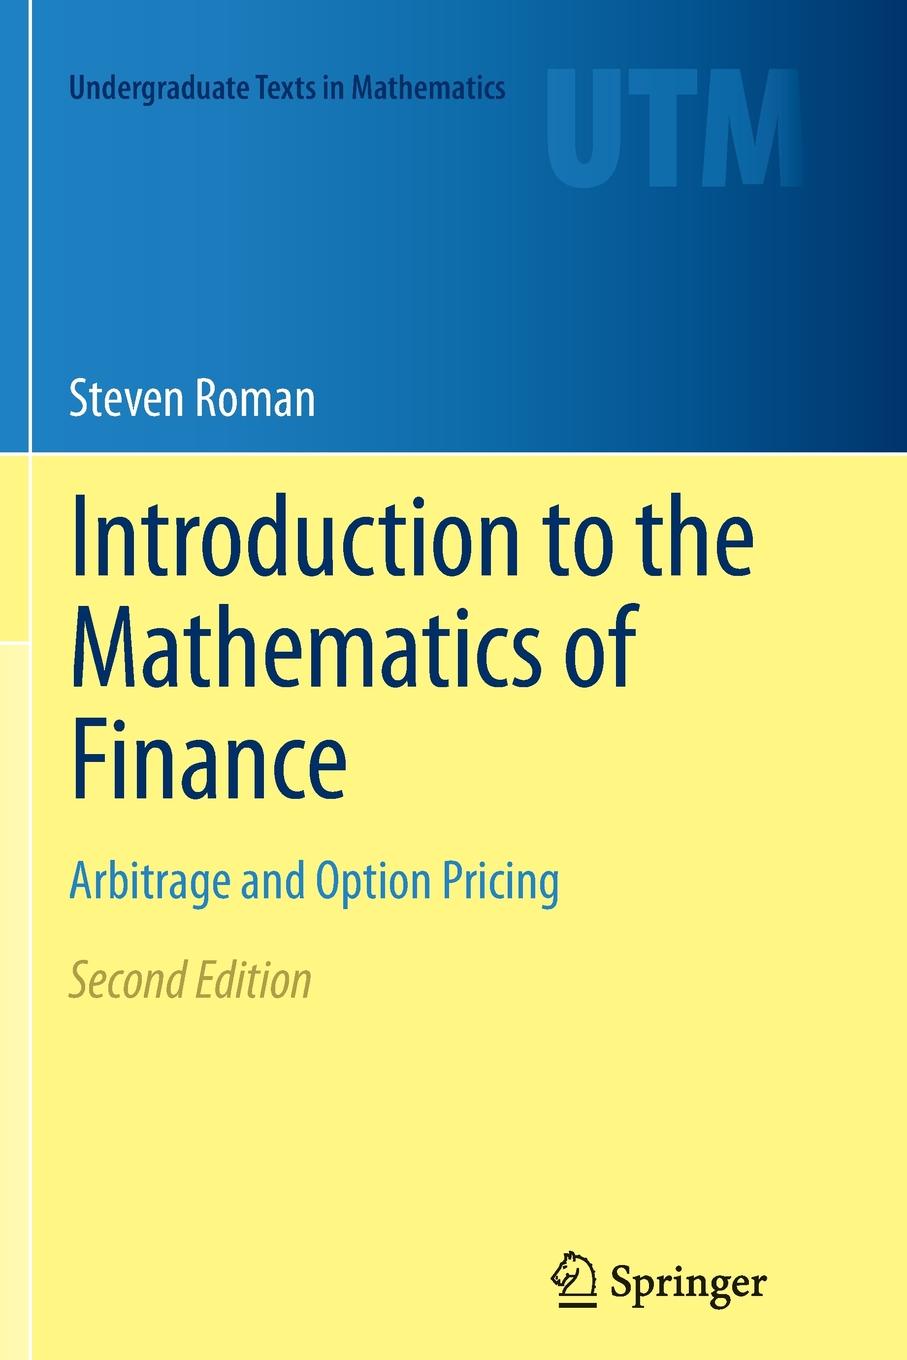 Introduction to the Mathematics of Finance. Arbitrage and Option Pricing